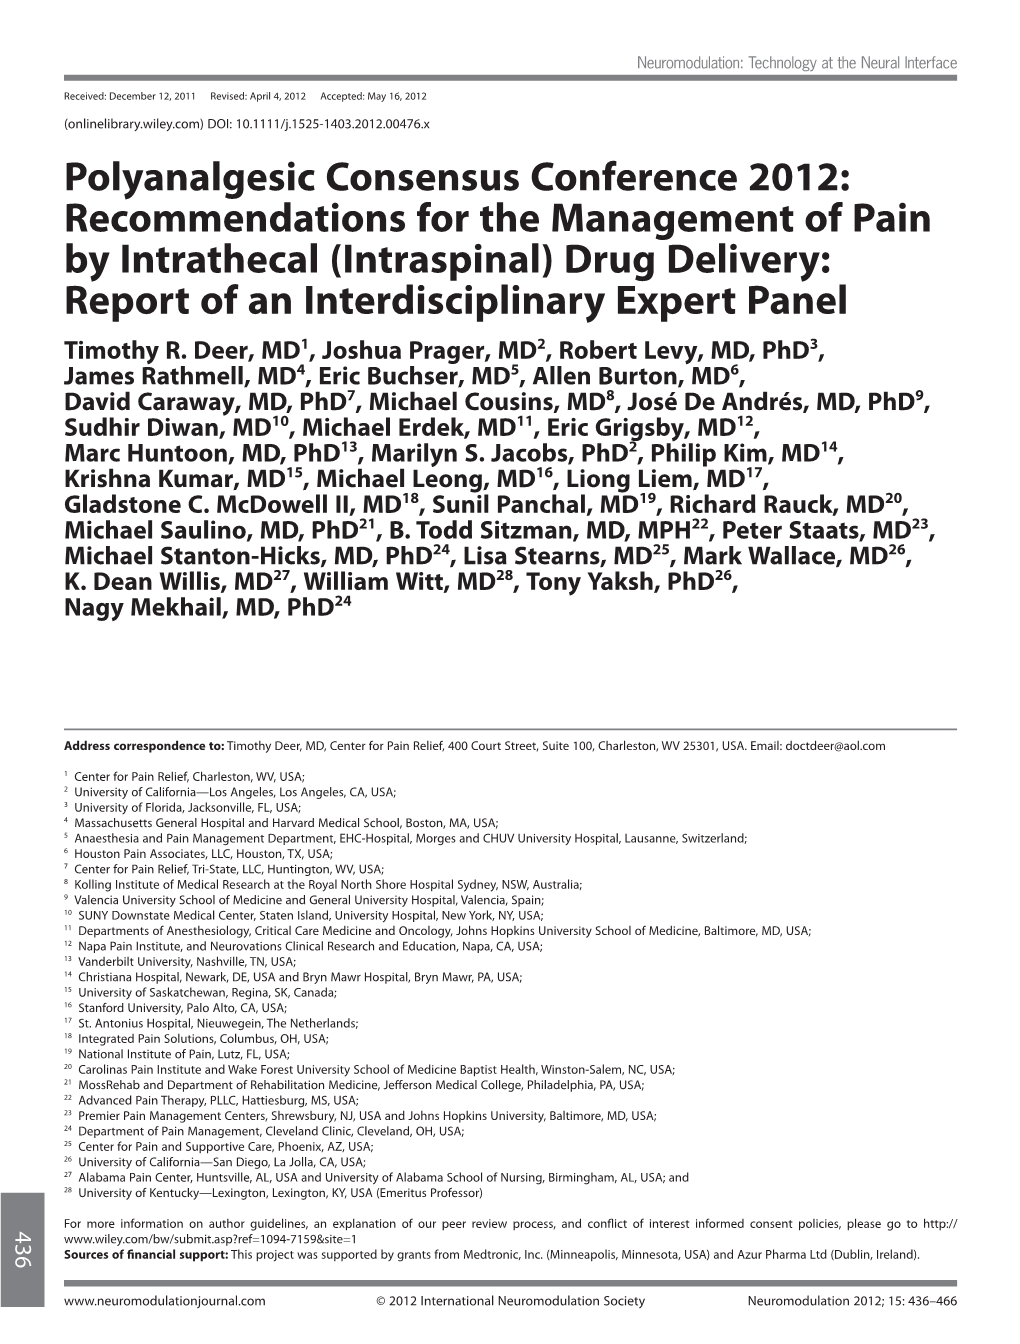 Polyanalgesic Consensus Conference 2012: Recommendations for the Management of Pain by Intrathecal (Intraspinal) Drug Delivery